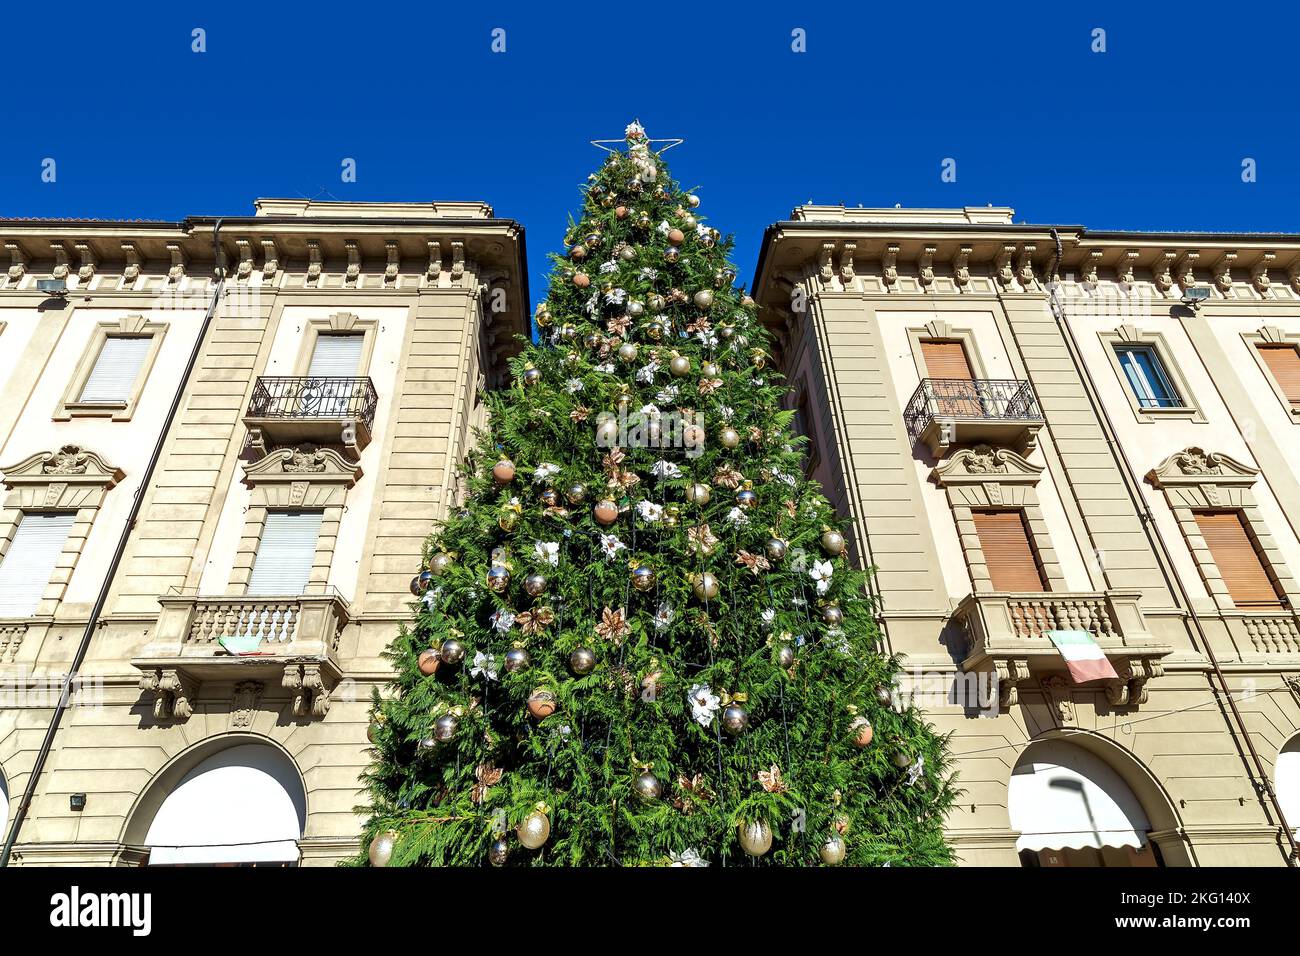 Decorated Christmas tree among old buildings on the town square in Alba, Piedmont, Northern Italy (low angle view). Stock Photo